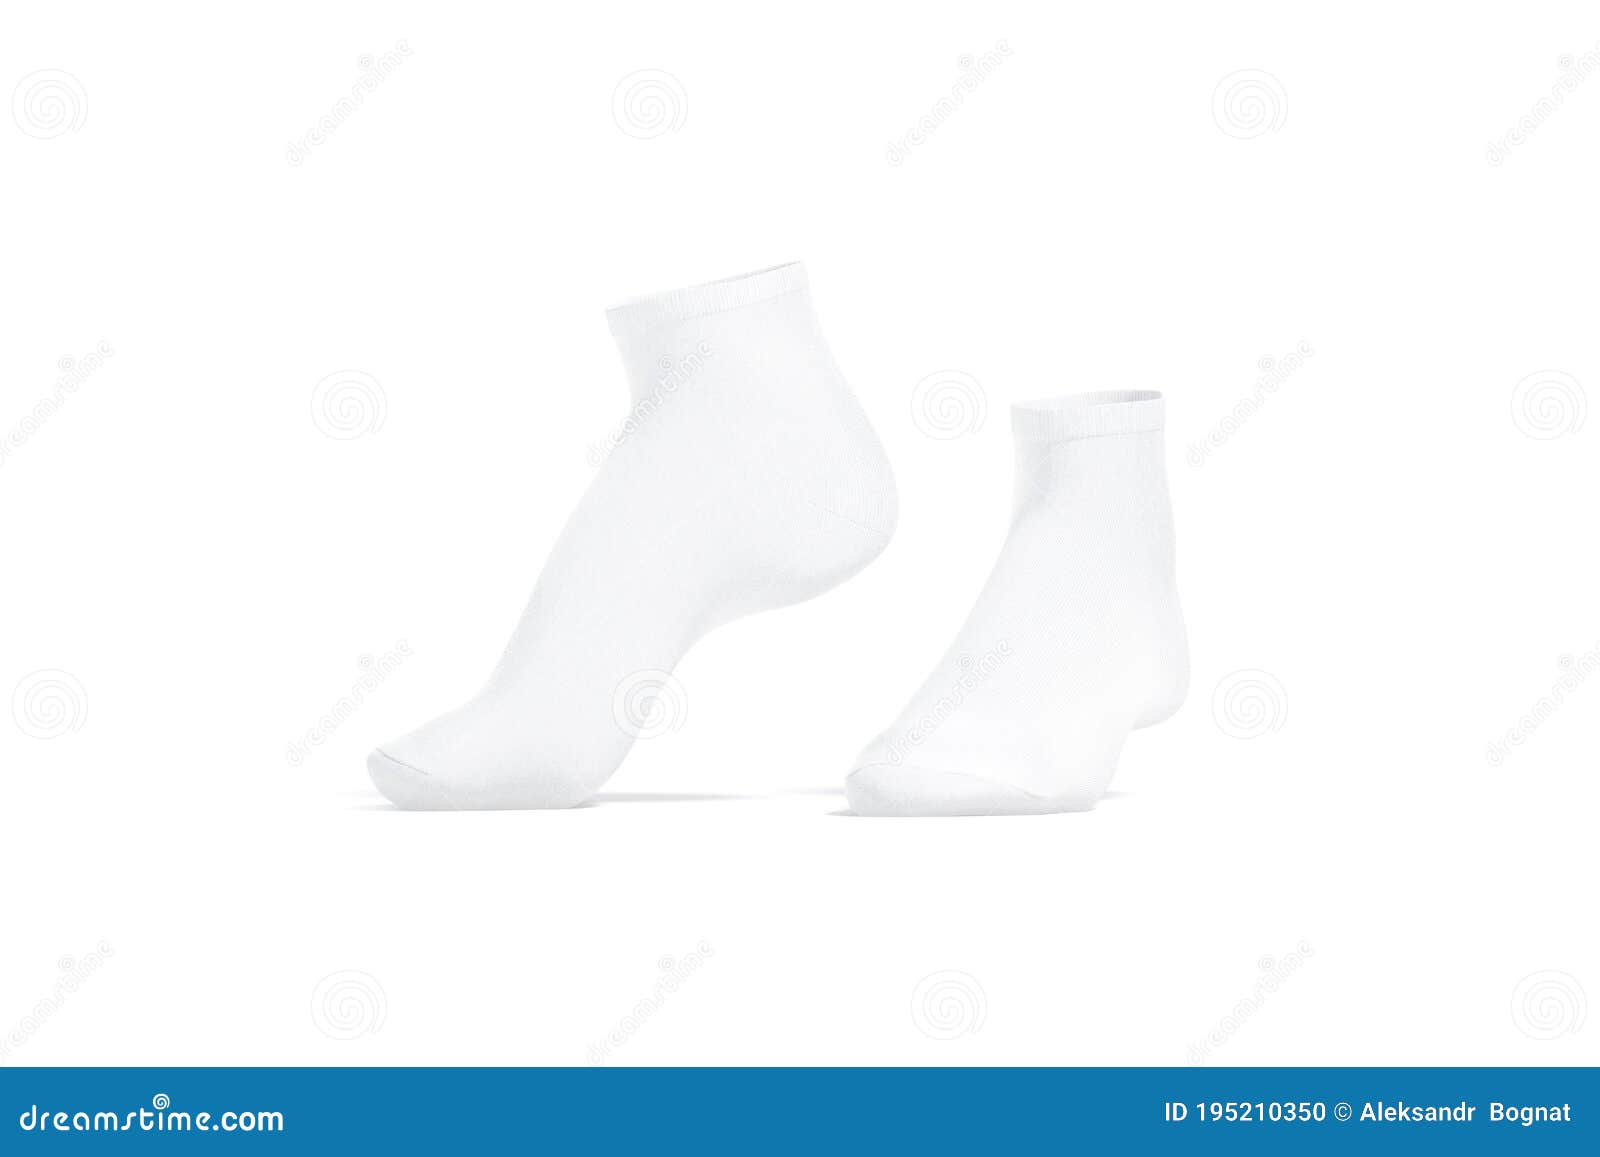 Download Blank White Ancle Socks Pair Mockup Toe, Side View Stock ...